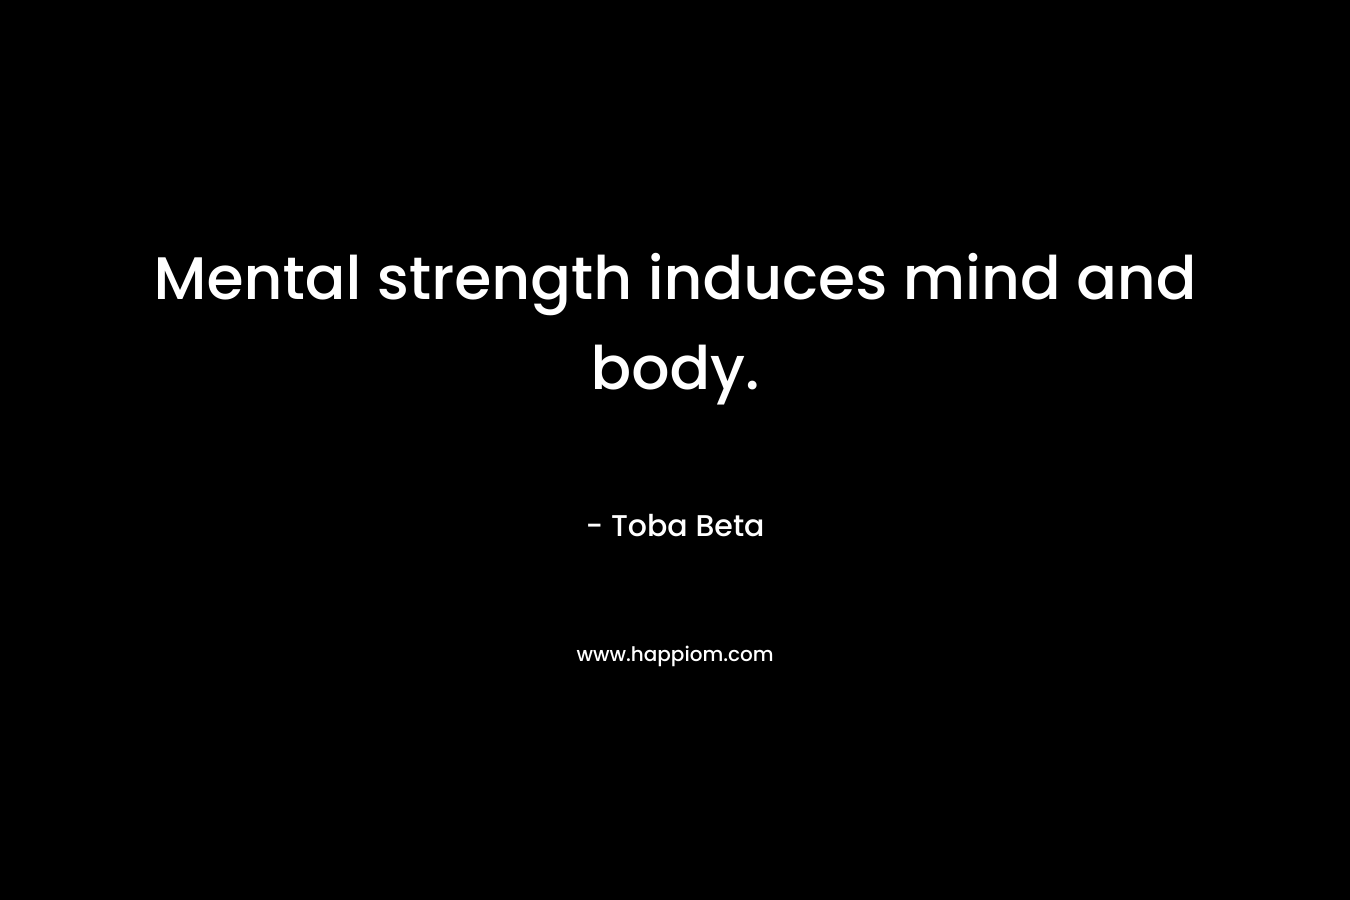 Mental strength induces mind and body. – Toba Beta